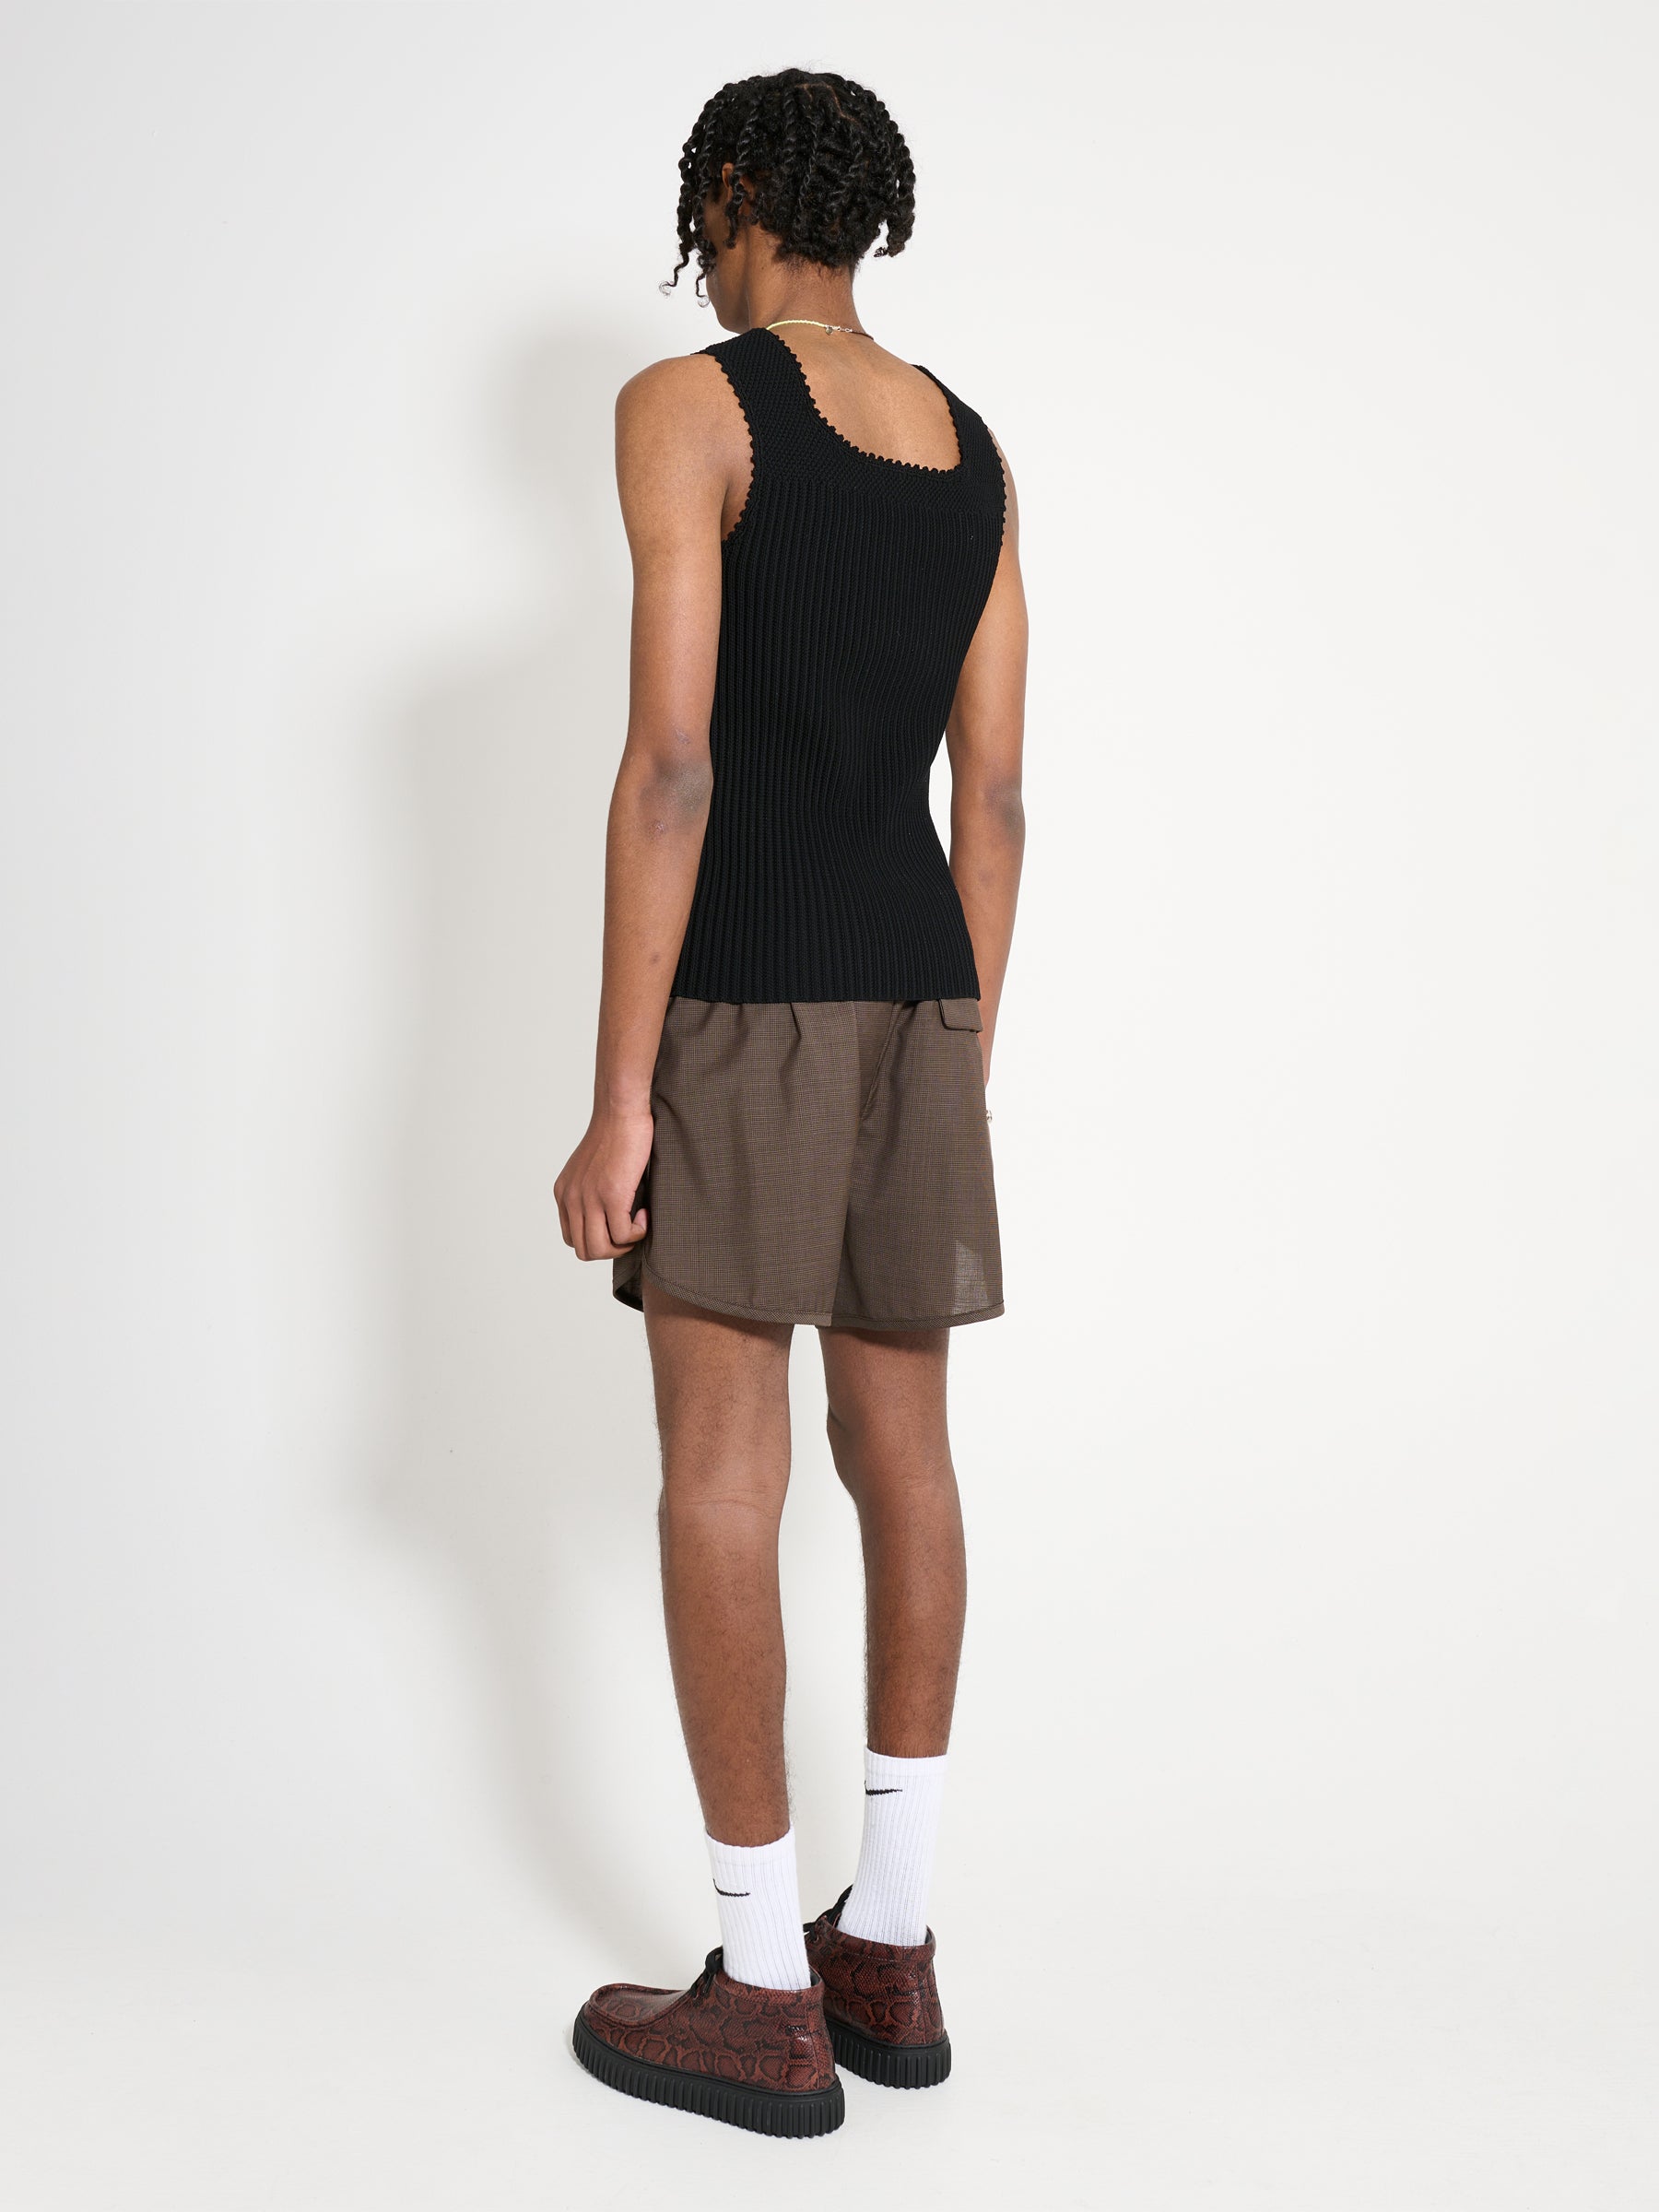 Martine Rose Tailored Gym Short Brown Houndstooth